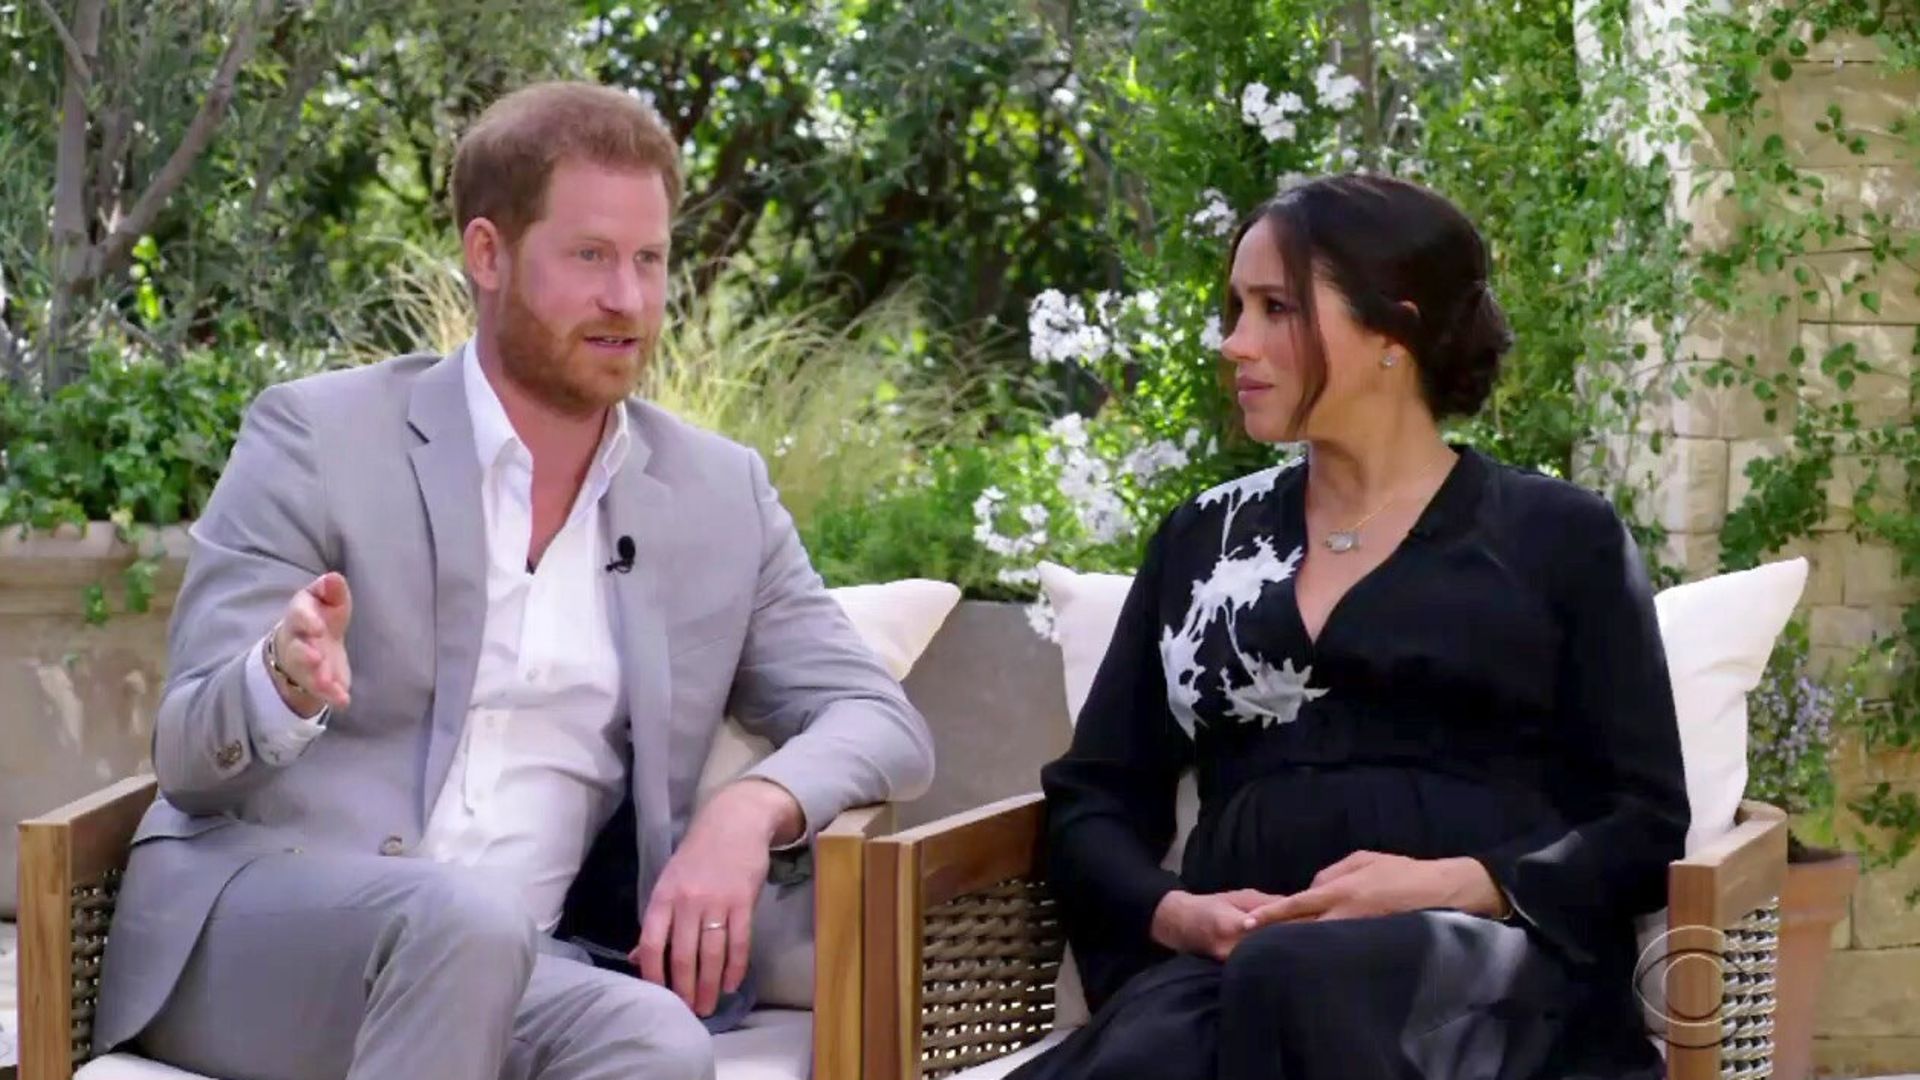 Harry and Meghan are interviewed by Oprah - Credit: CBS